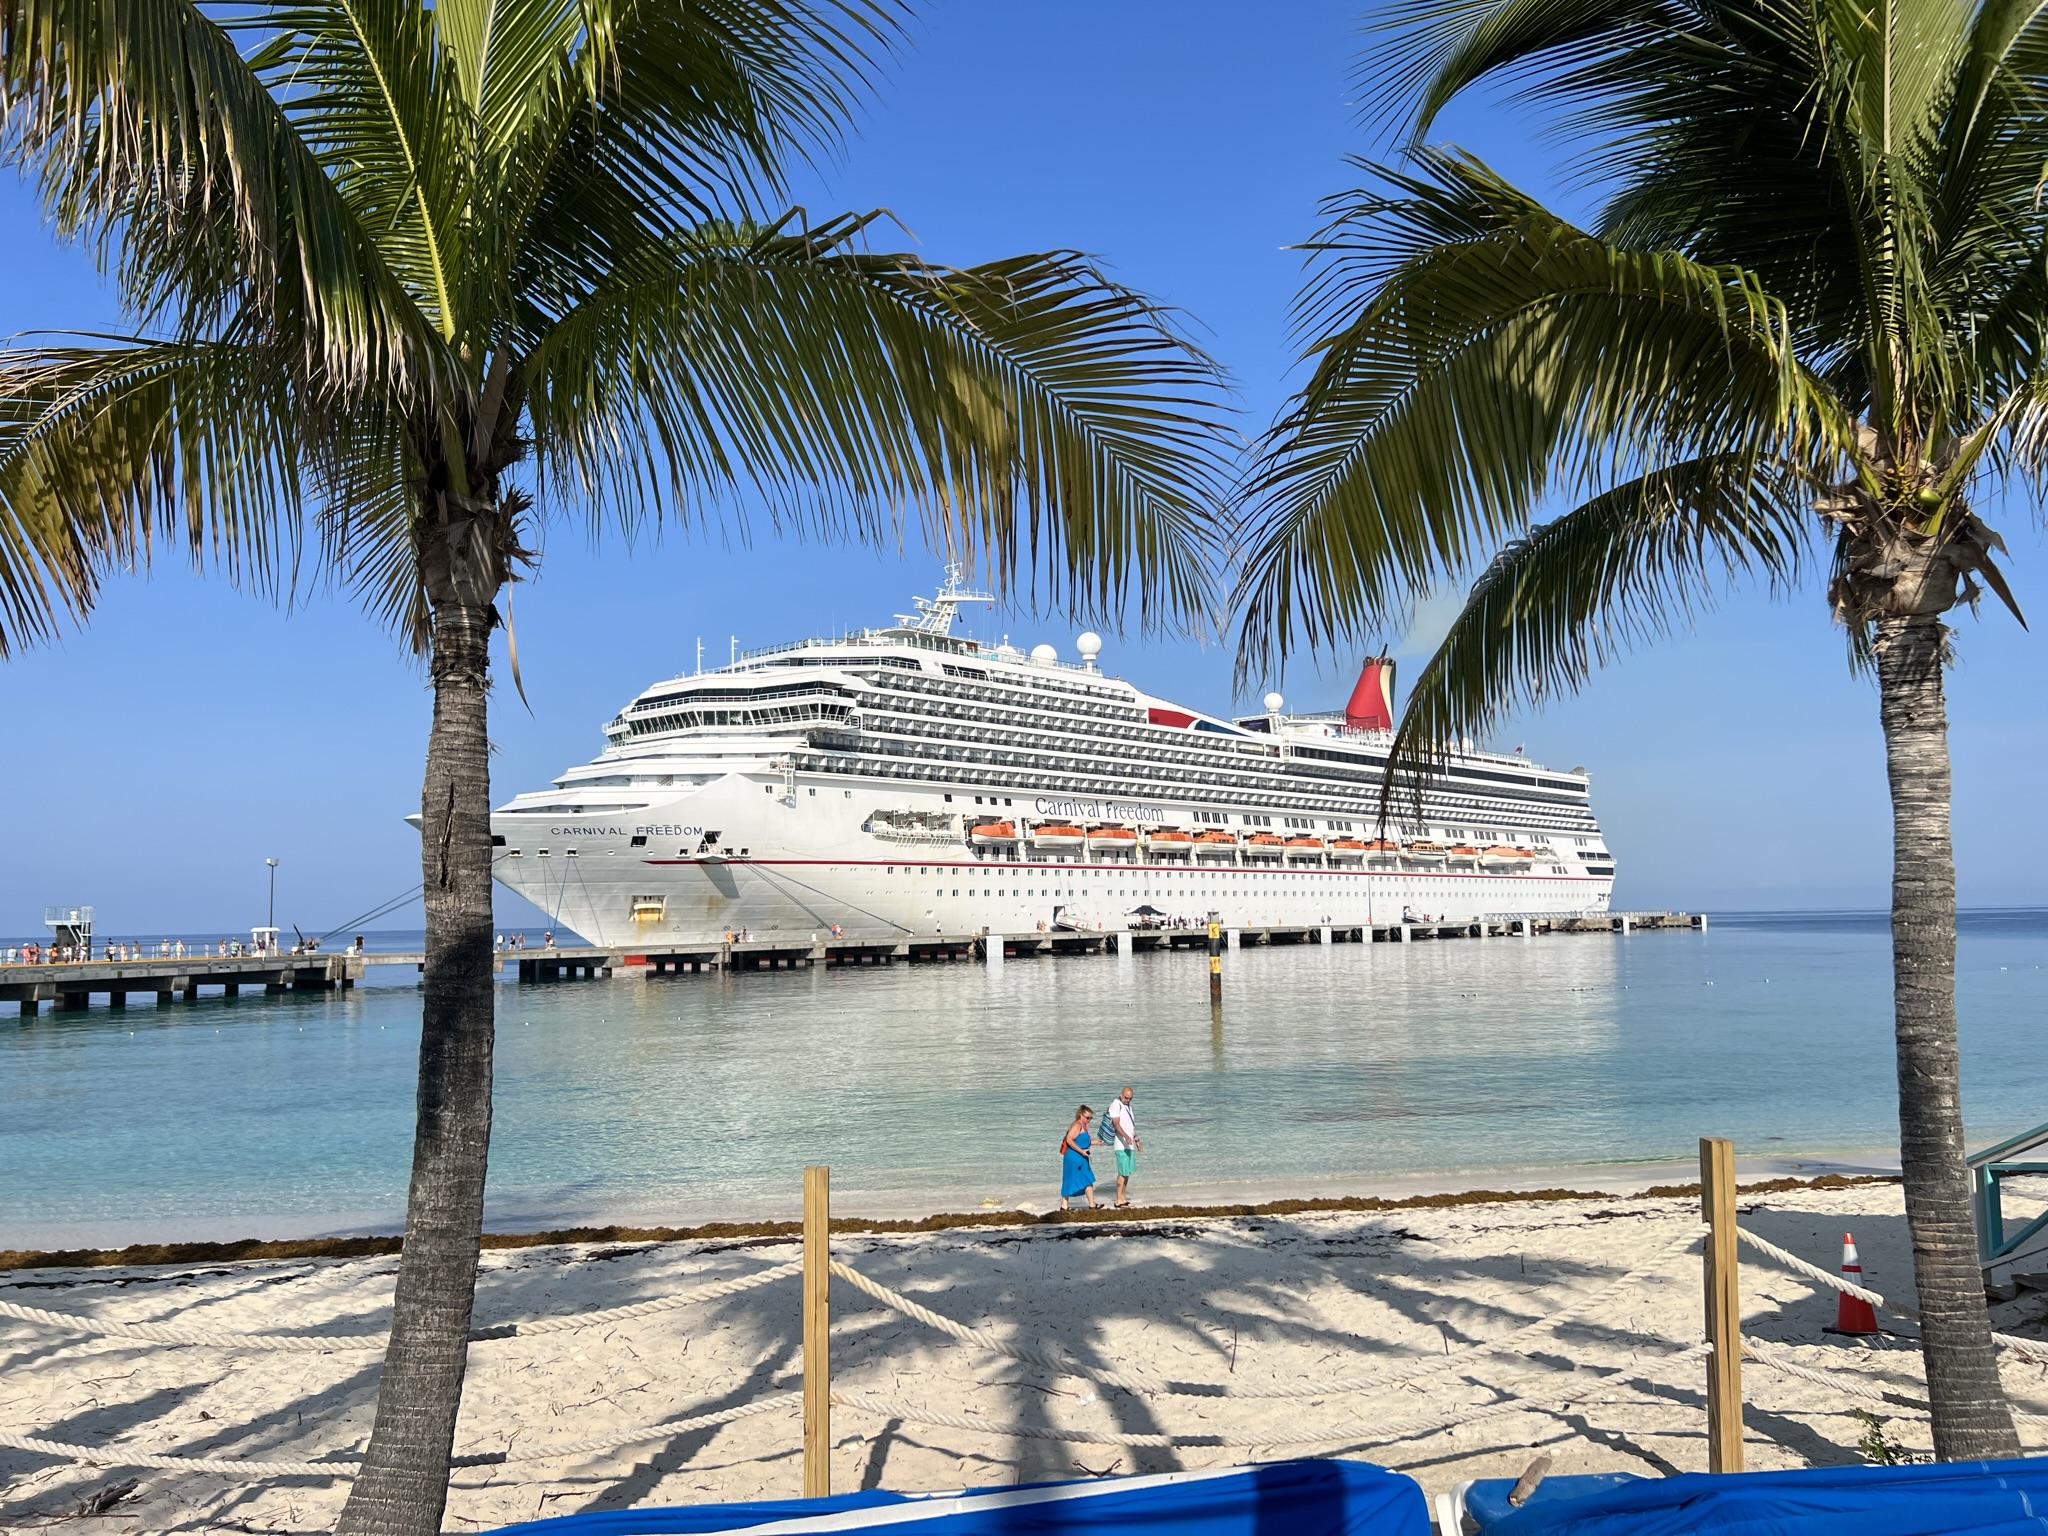 Cruise Excursion Shorts - Grand Turk Cruise Center in the Turks and Caicos Islands